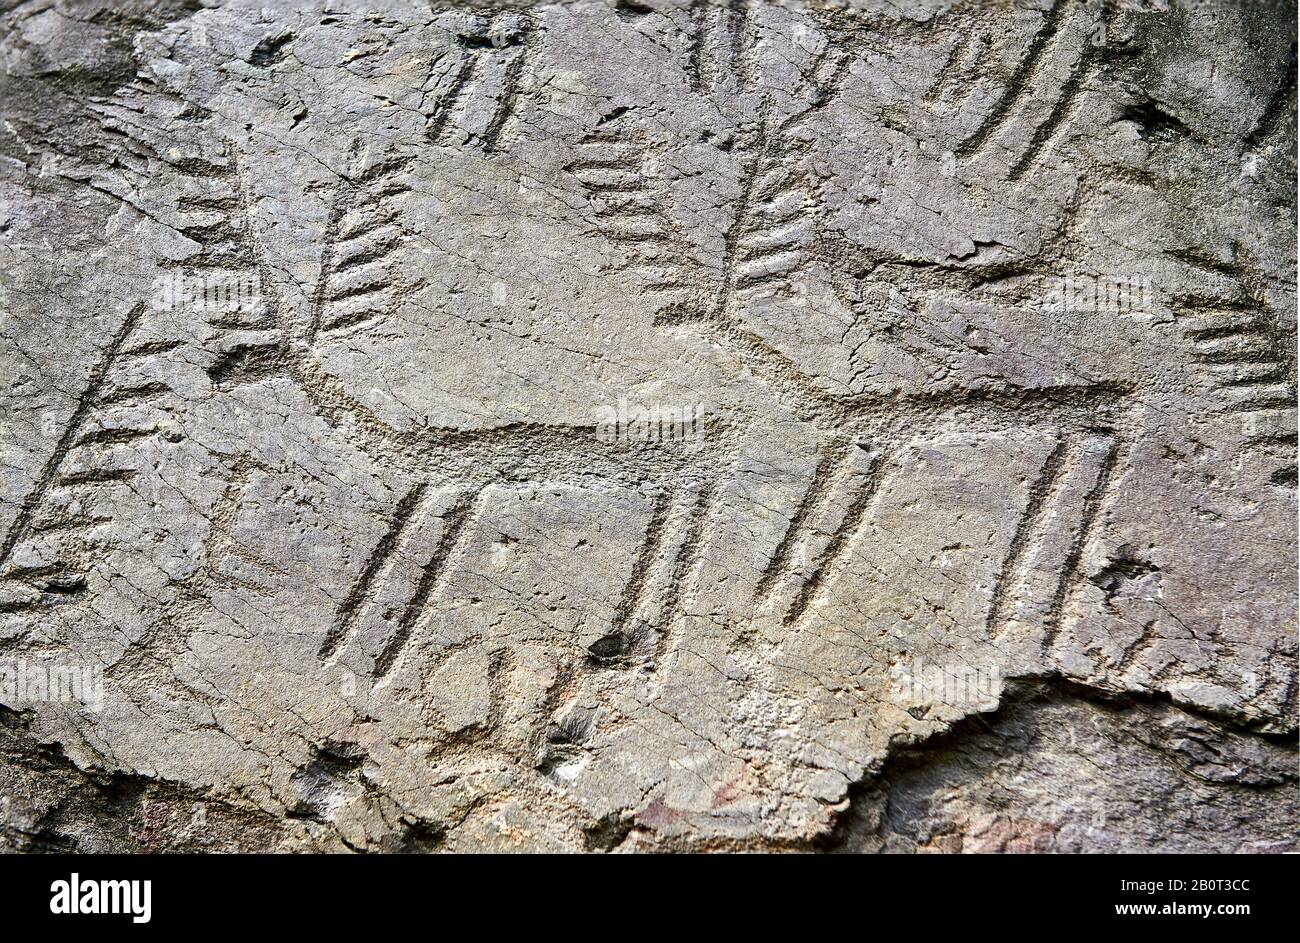 Prehistoric  petroglyphs, rock carvings, of deer in an ancient snctuary carved by the the ancient Camuni people in the Copper Age around the 3rd mille Stock Photo